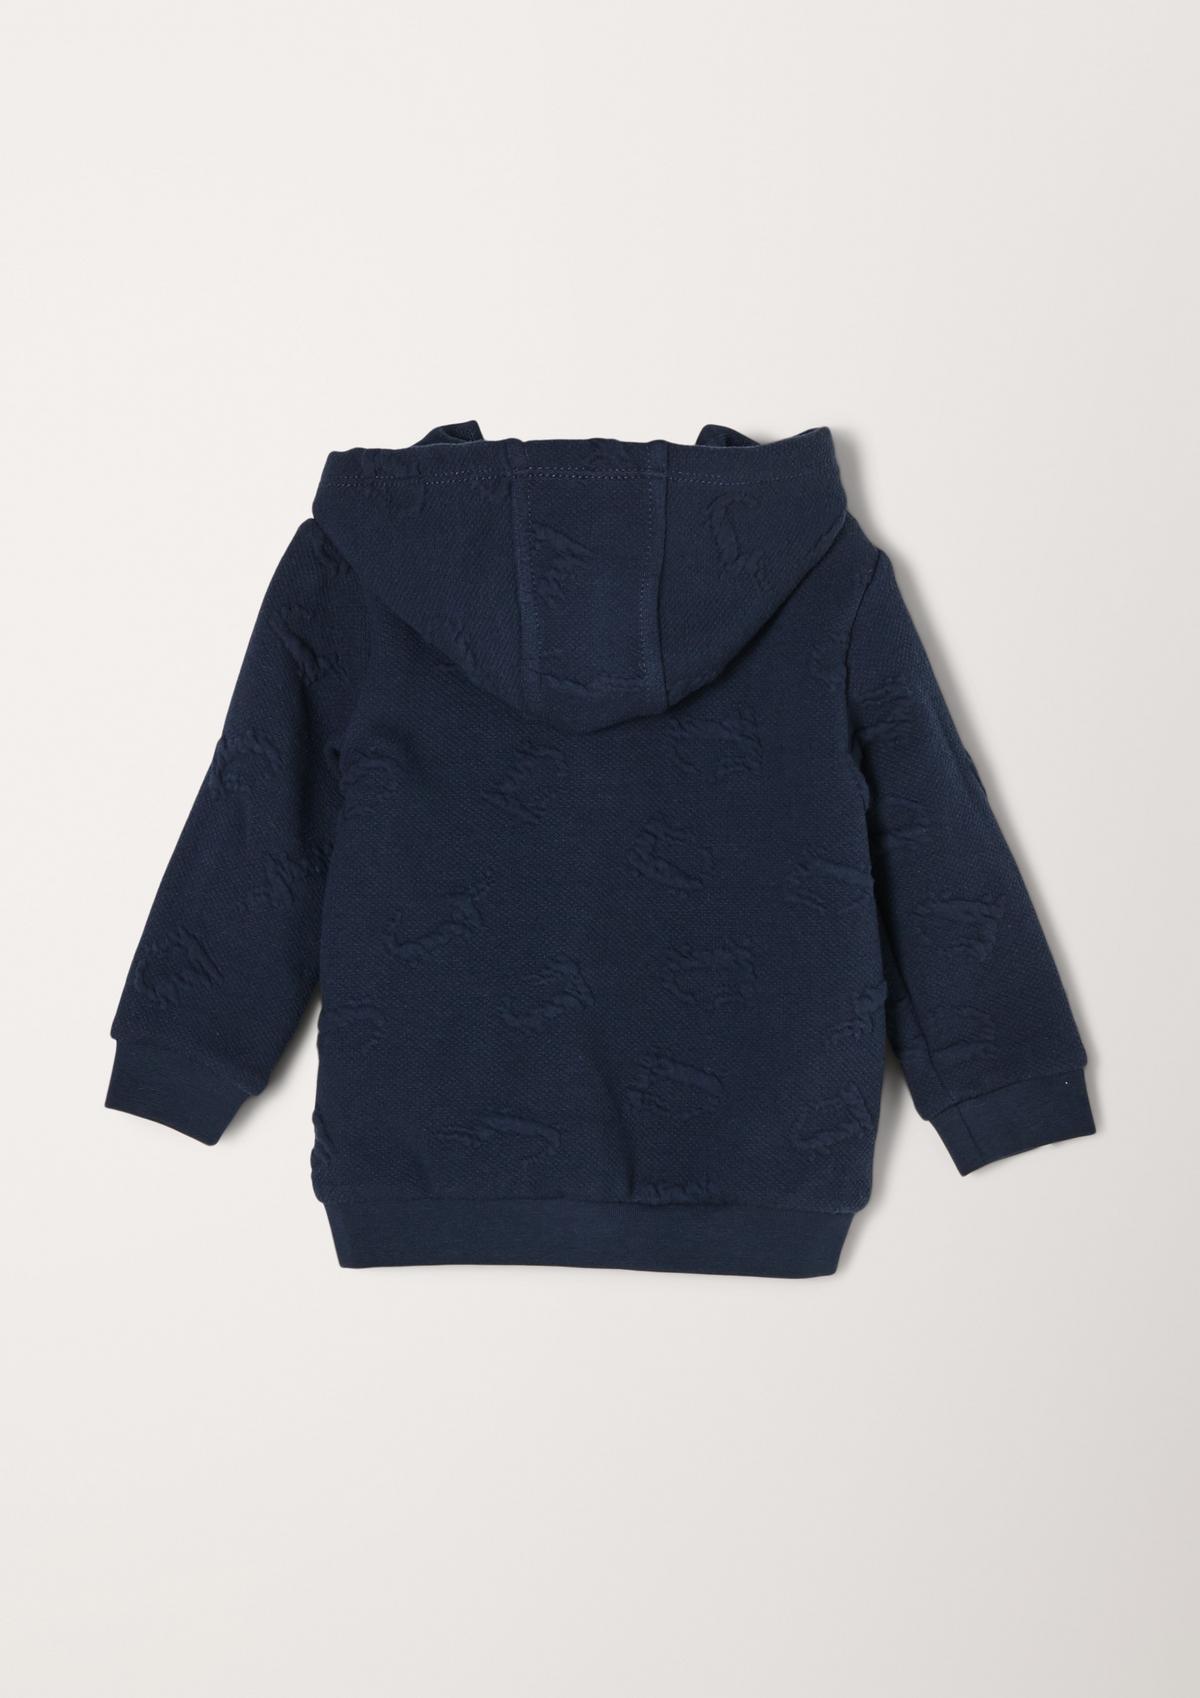 s.Oliver Sweatshirt jacket with a jacquard pattern